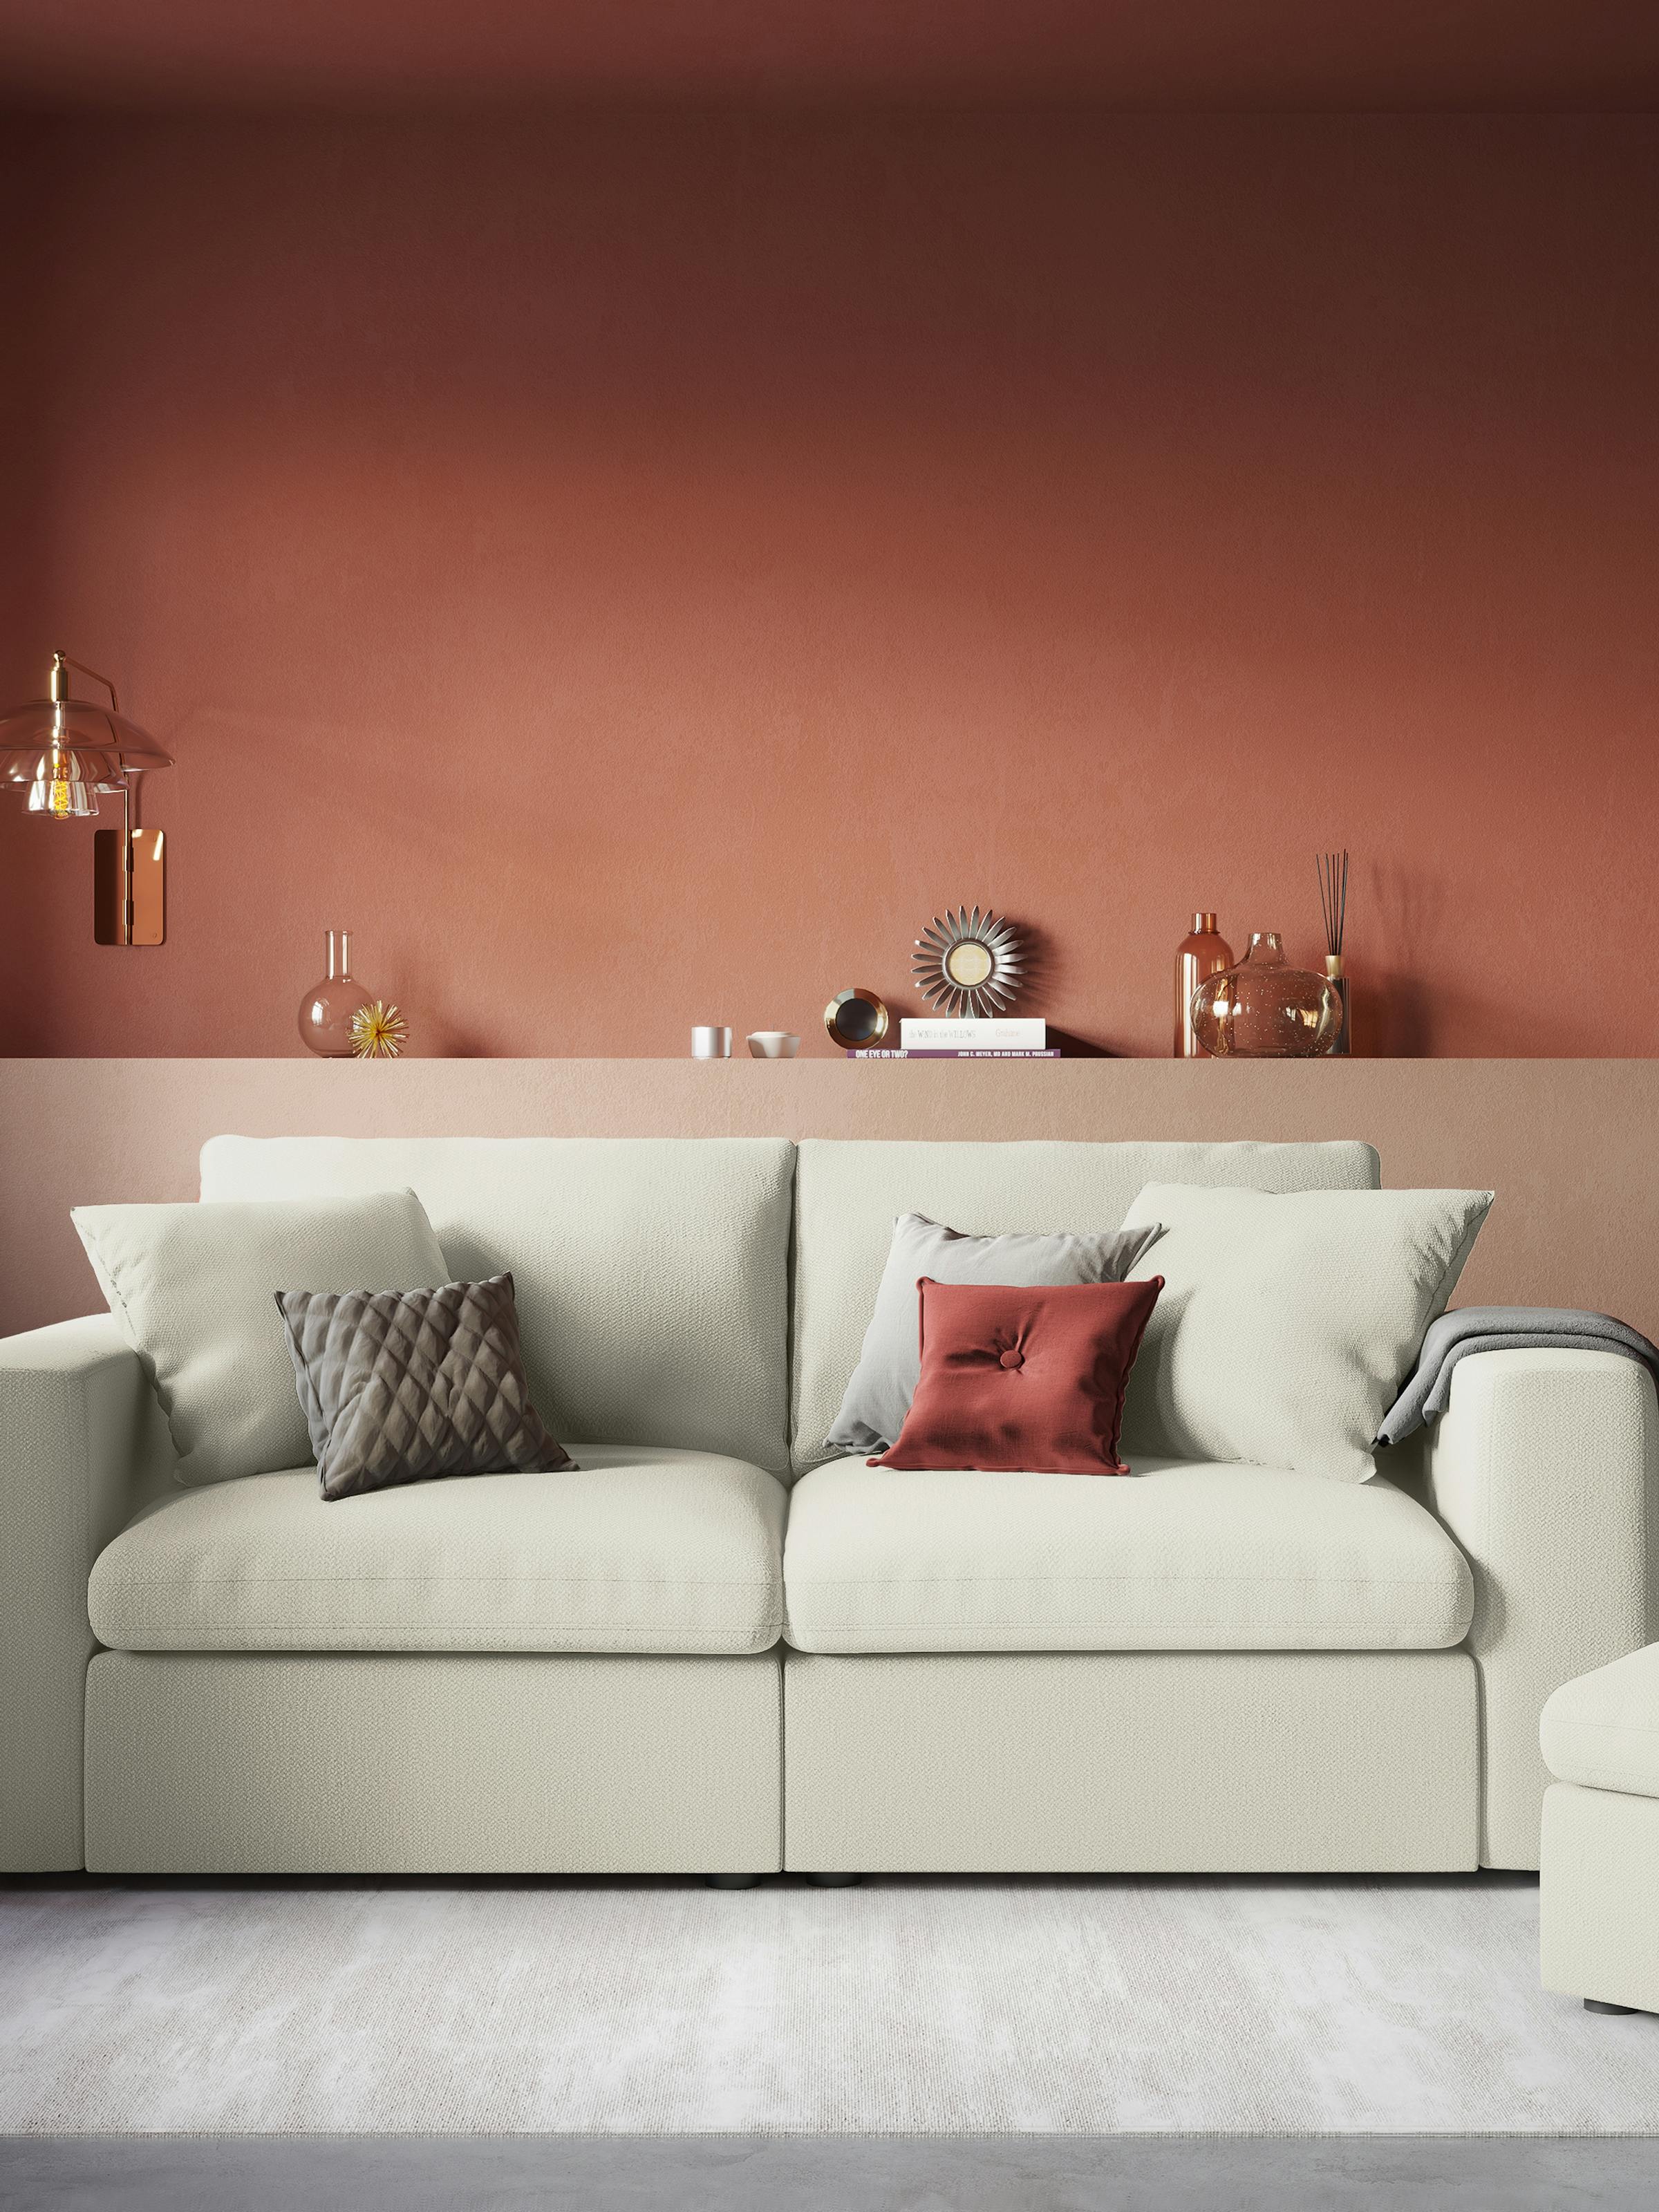 bosa-sofa-wthite-color-in-a-red-living-room